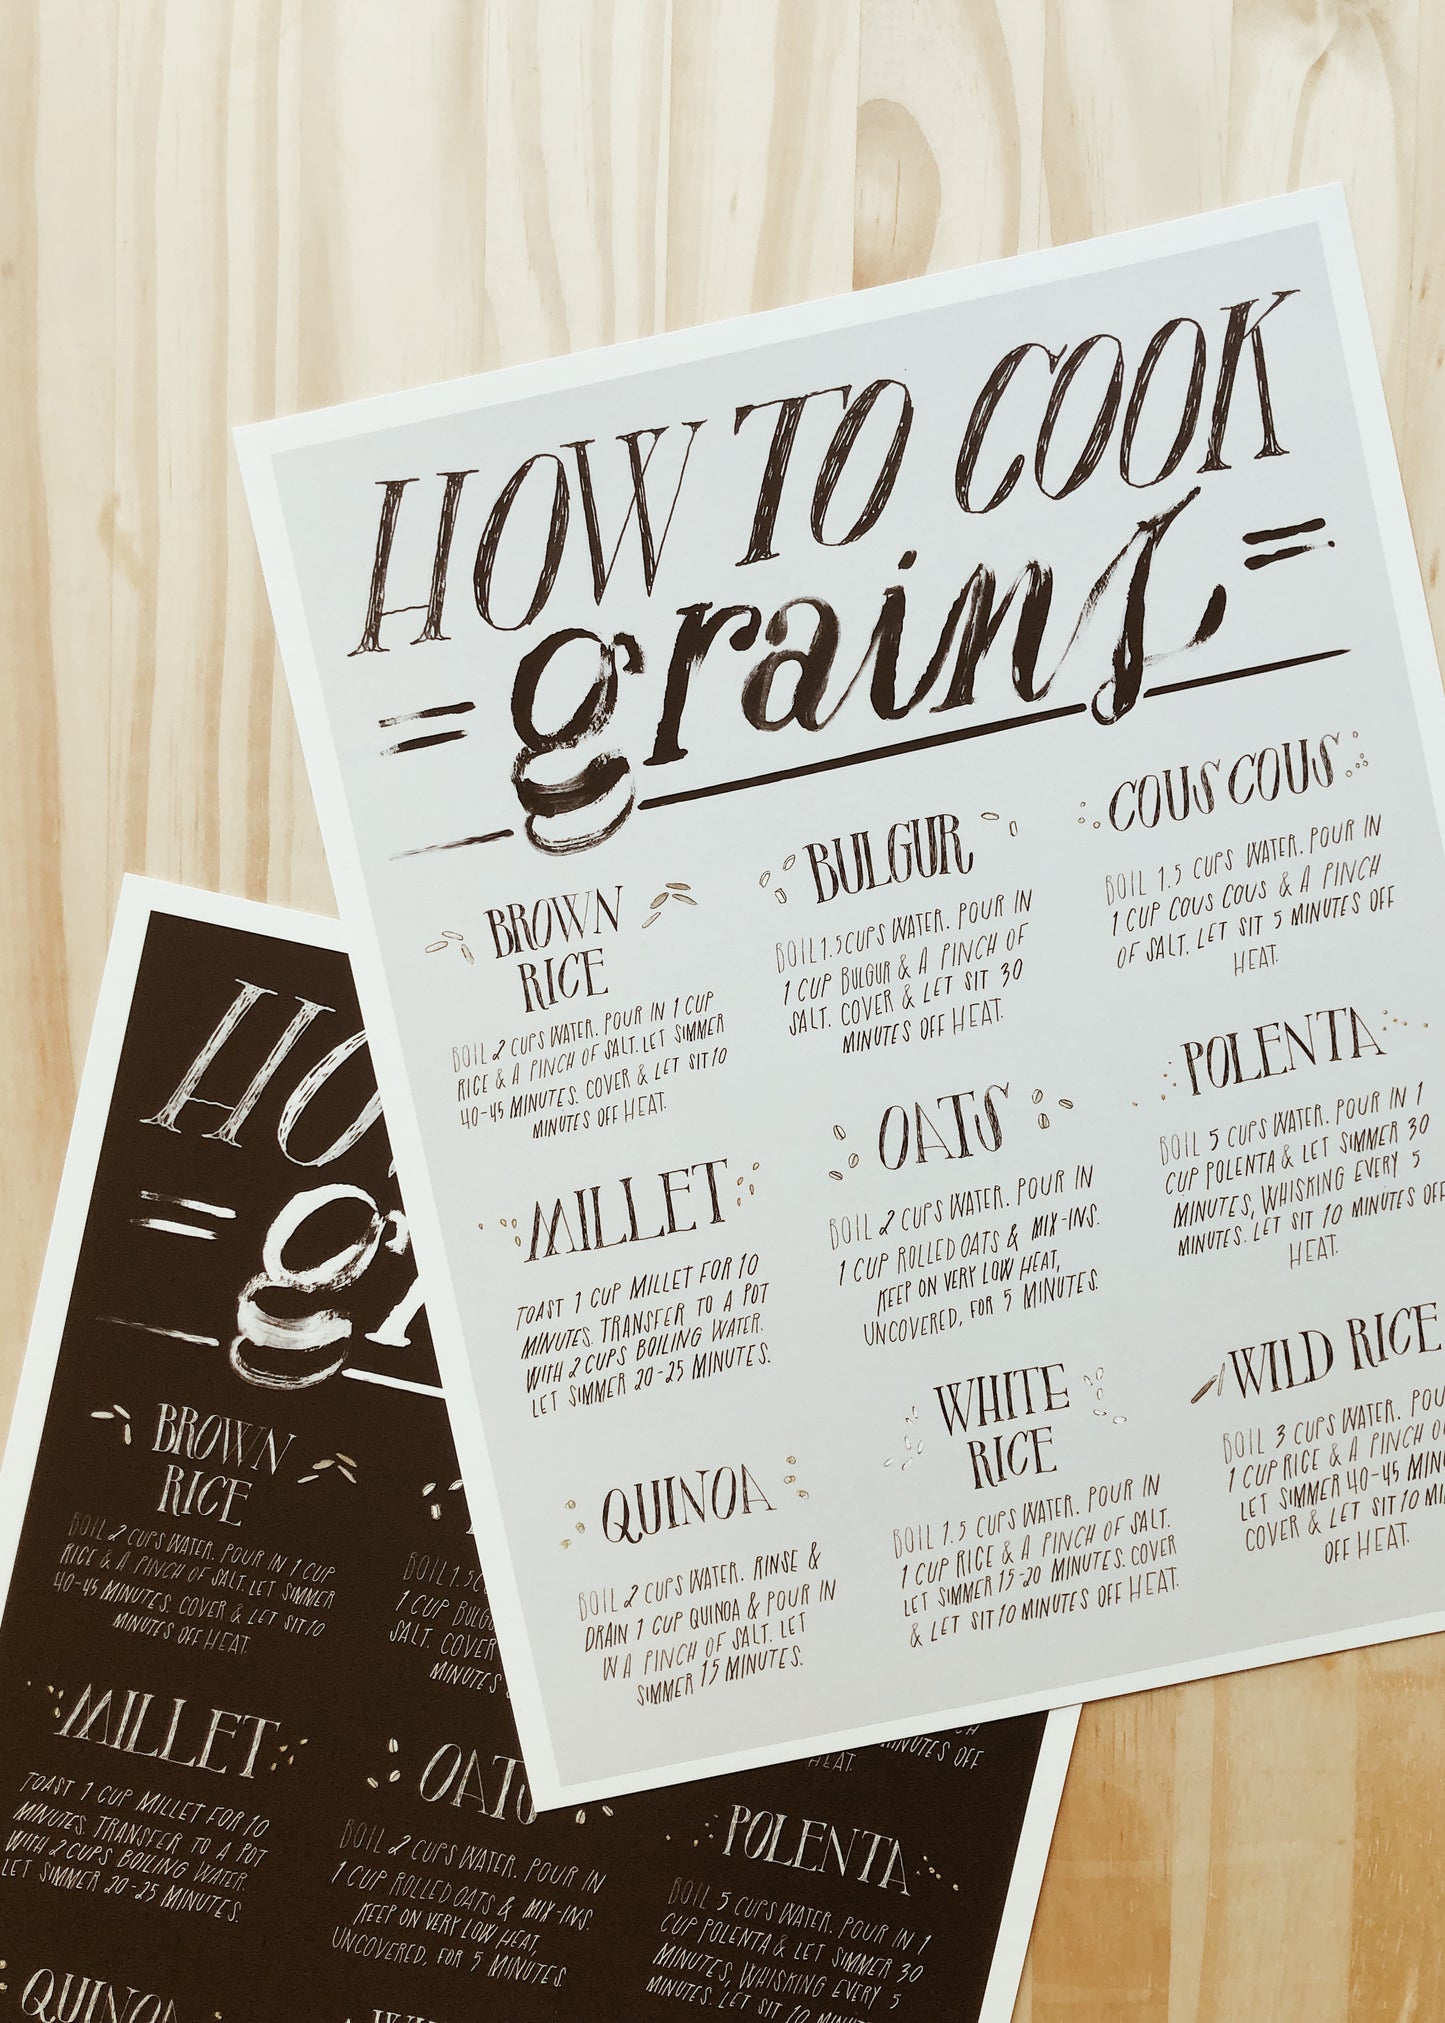 How to Cook Grains Poster